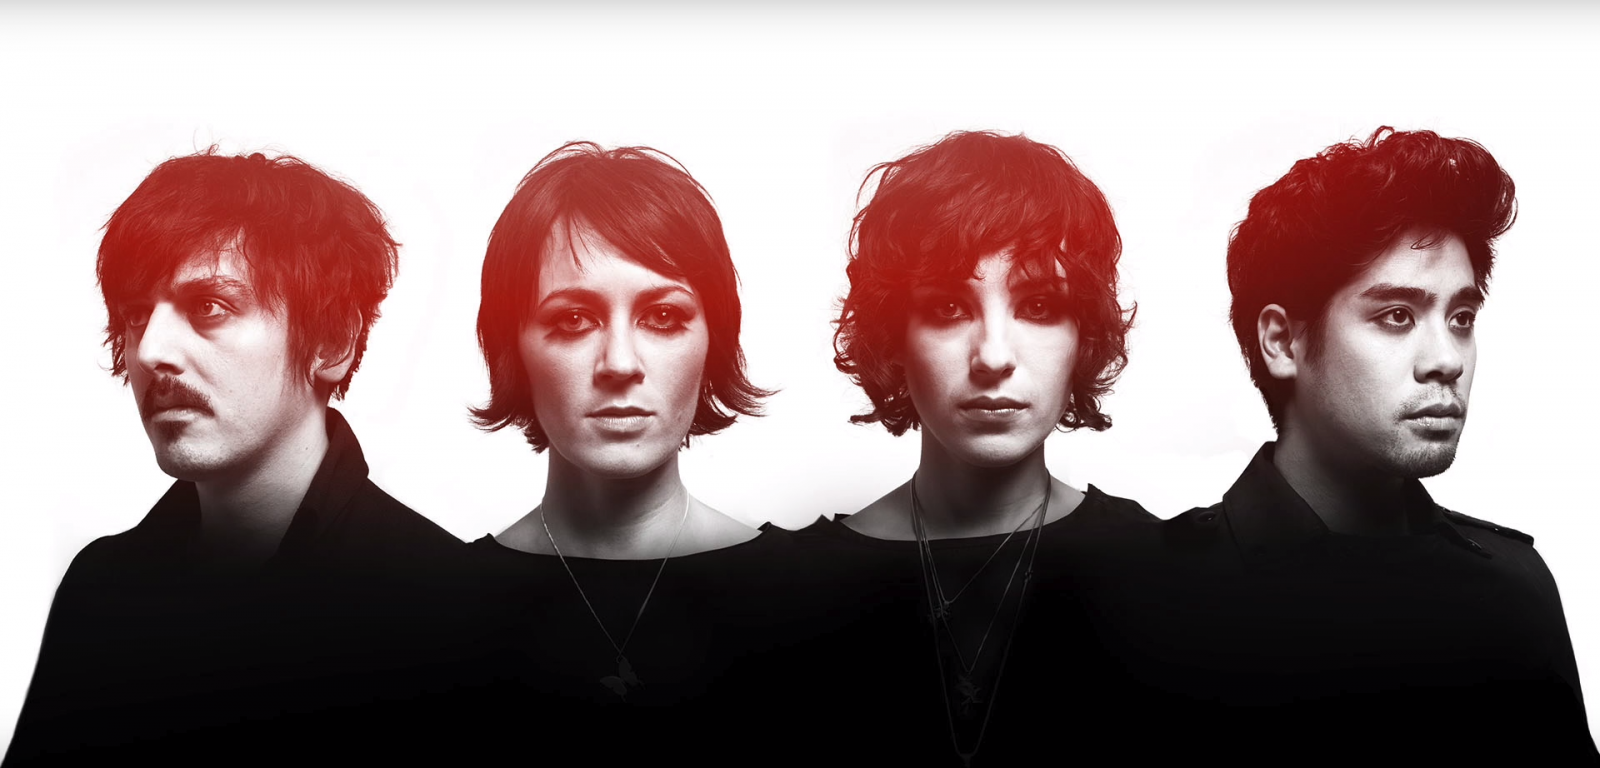 Ladytron return with "The Animals" off of their sixth studio